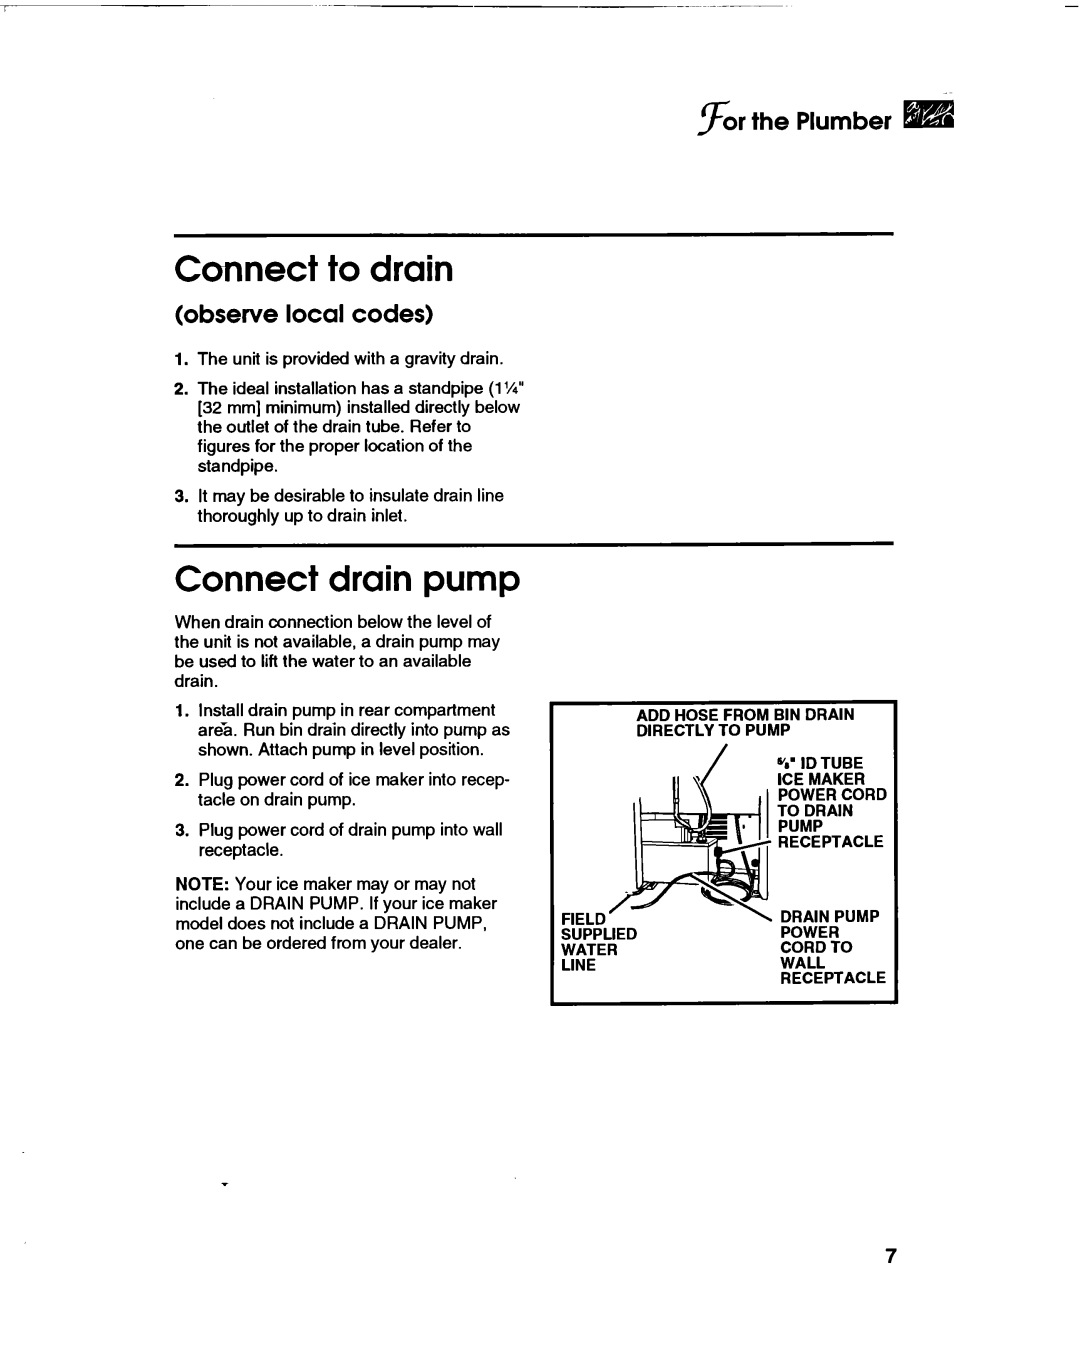 KitchenAid KULSL85 installation instructions Connect to drain, Connect drain pump, sr the Plumber m, observe local codes 